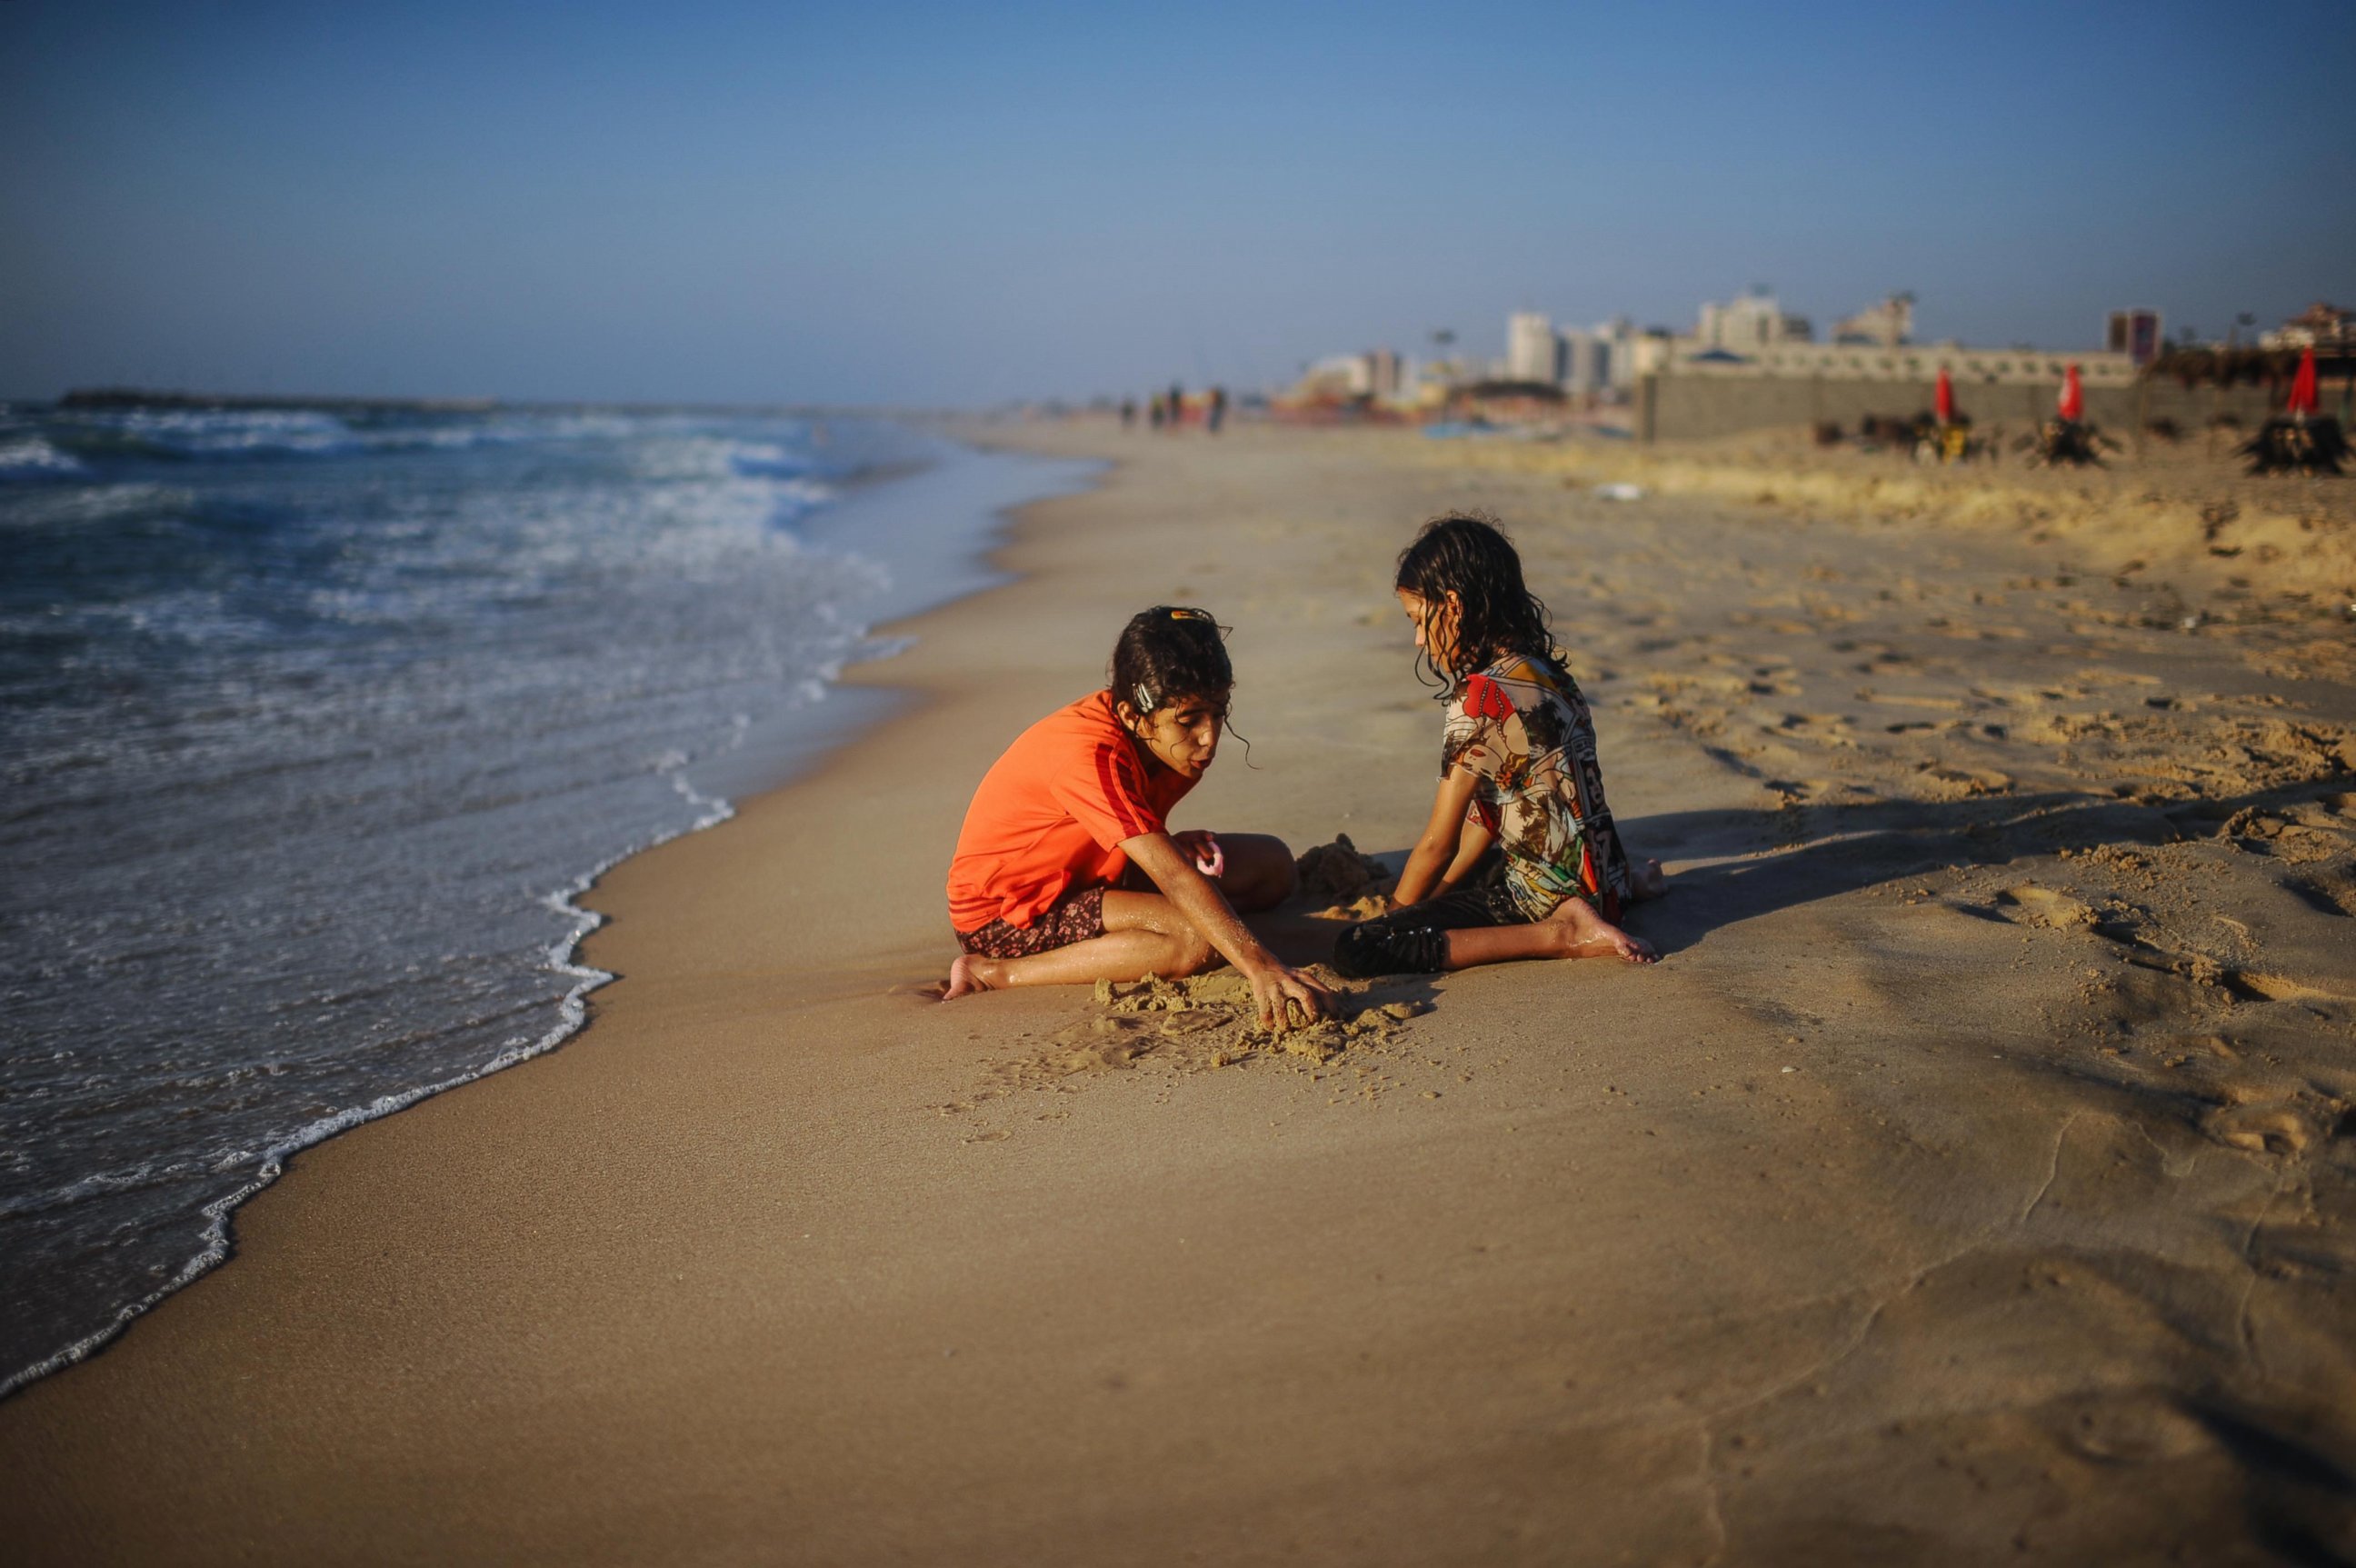 PHOTO: Palestinian children spend their time on the beaches during 72-hour humanitarian ceasefire in Gaza city, Gaza, Aug. 5, 2014. 